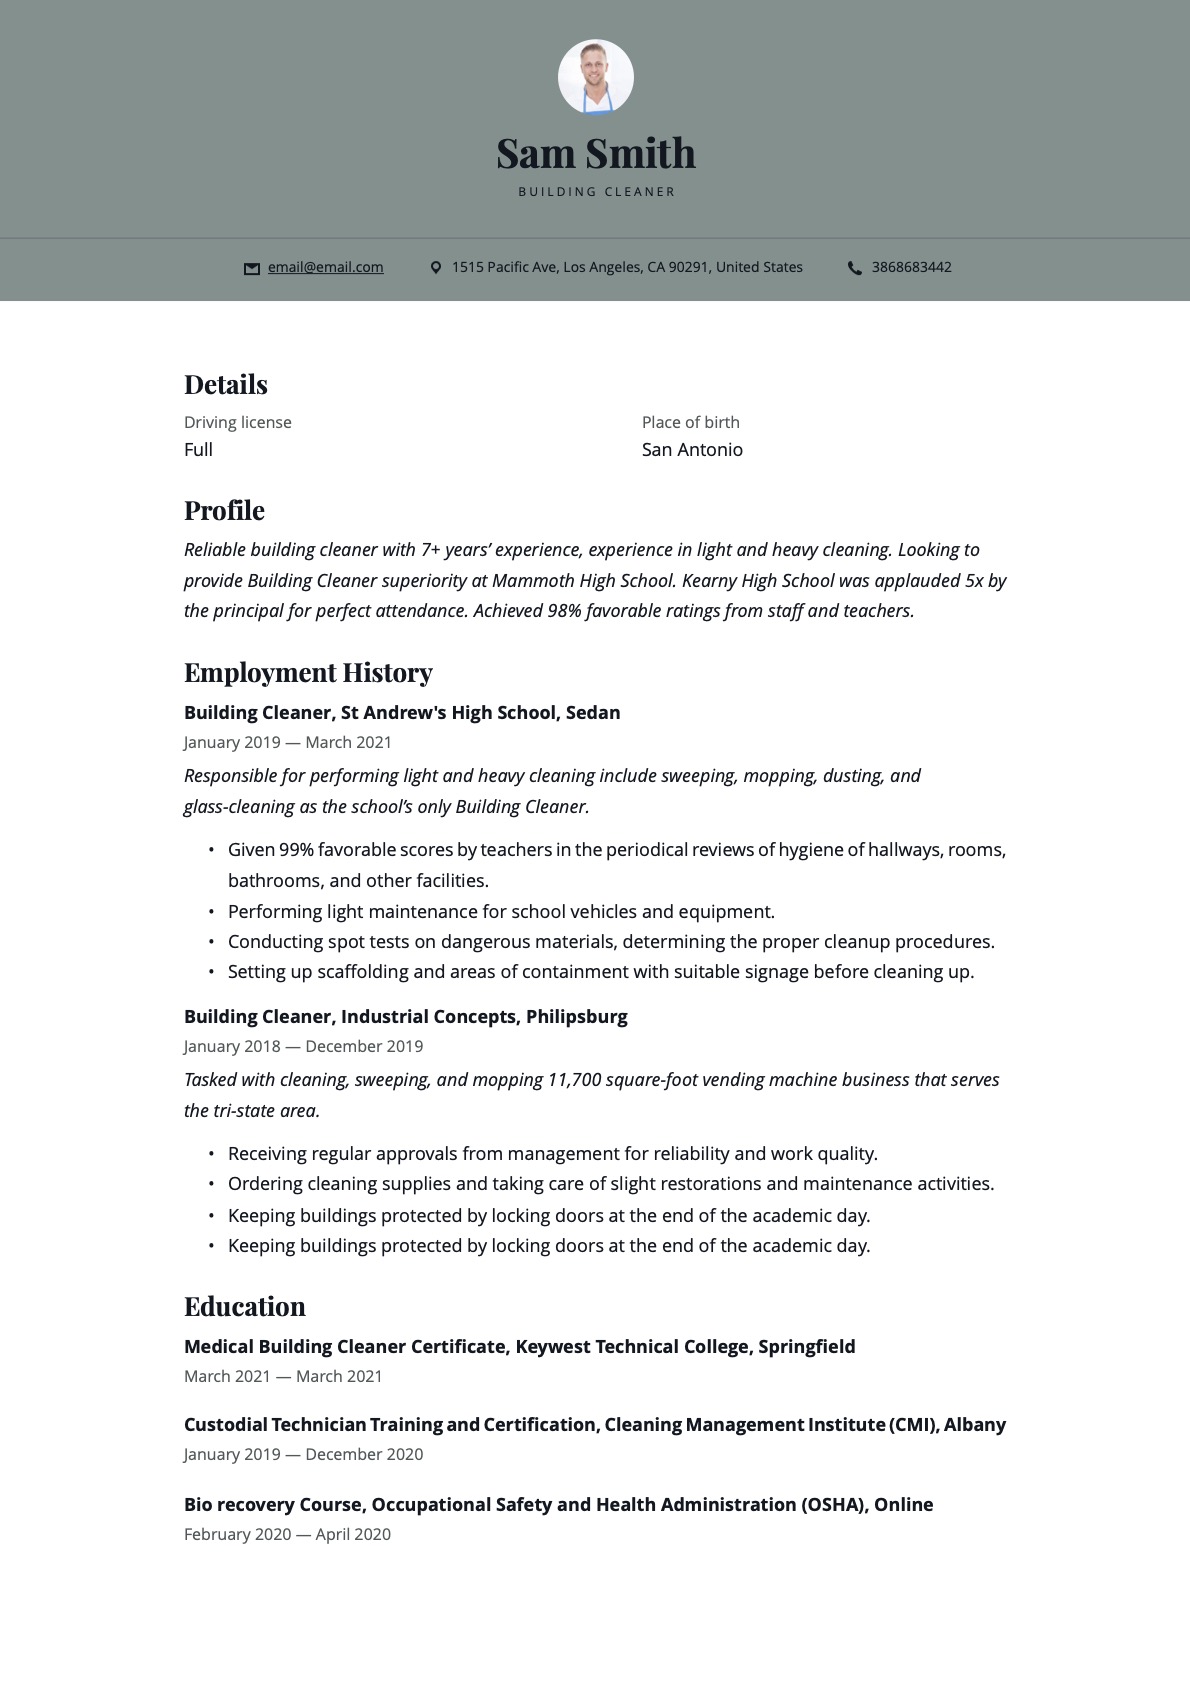 Example Resume Building Cleaner-12